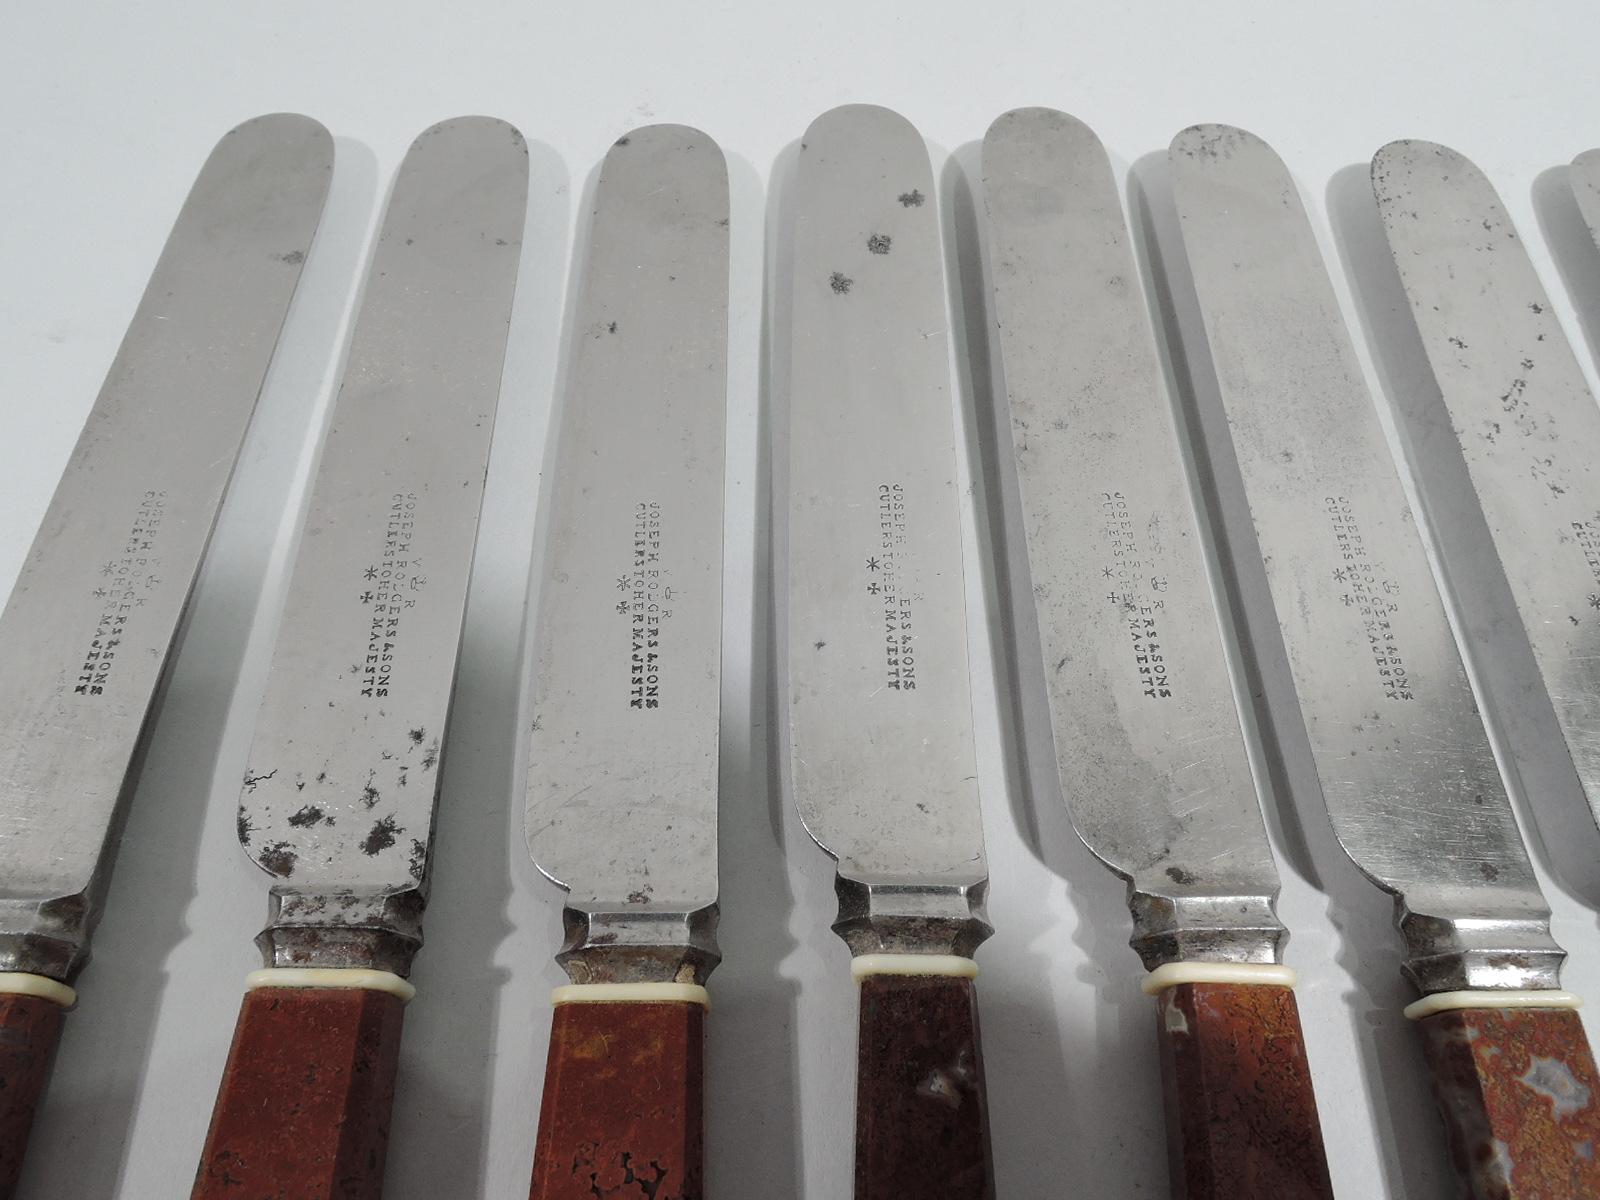 joseph rodgers and sons knife value